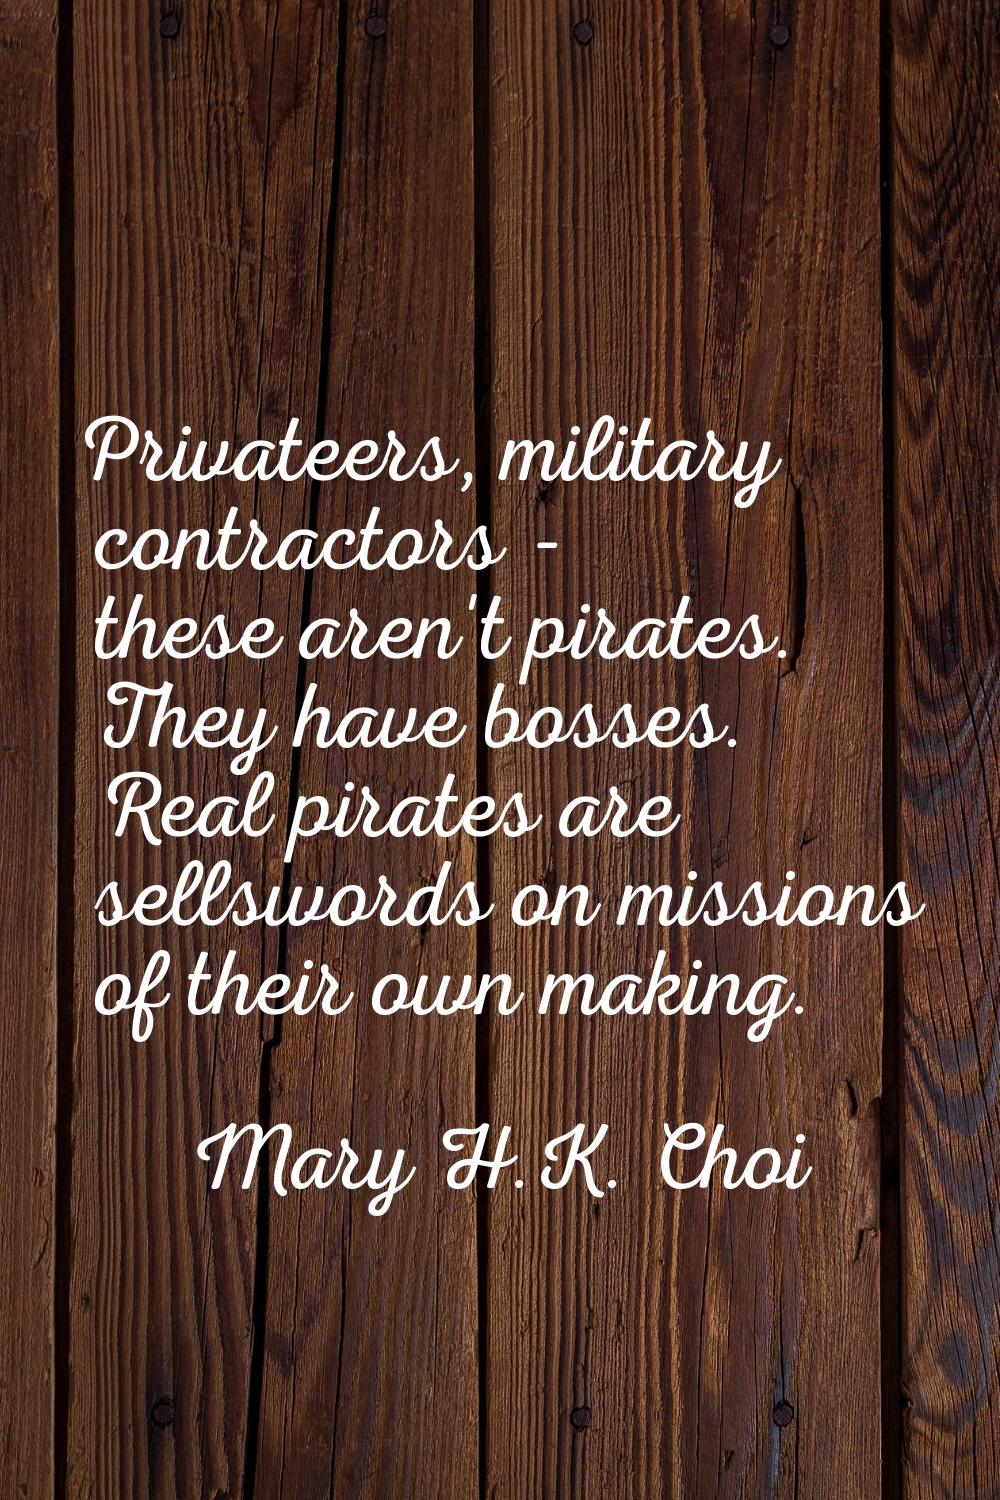 Privateers, military contractors - these aren't pirates. They have bosses. Real pirates are sellswo